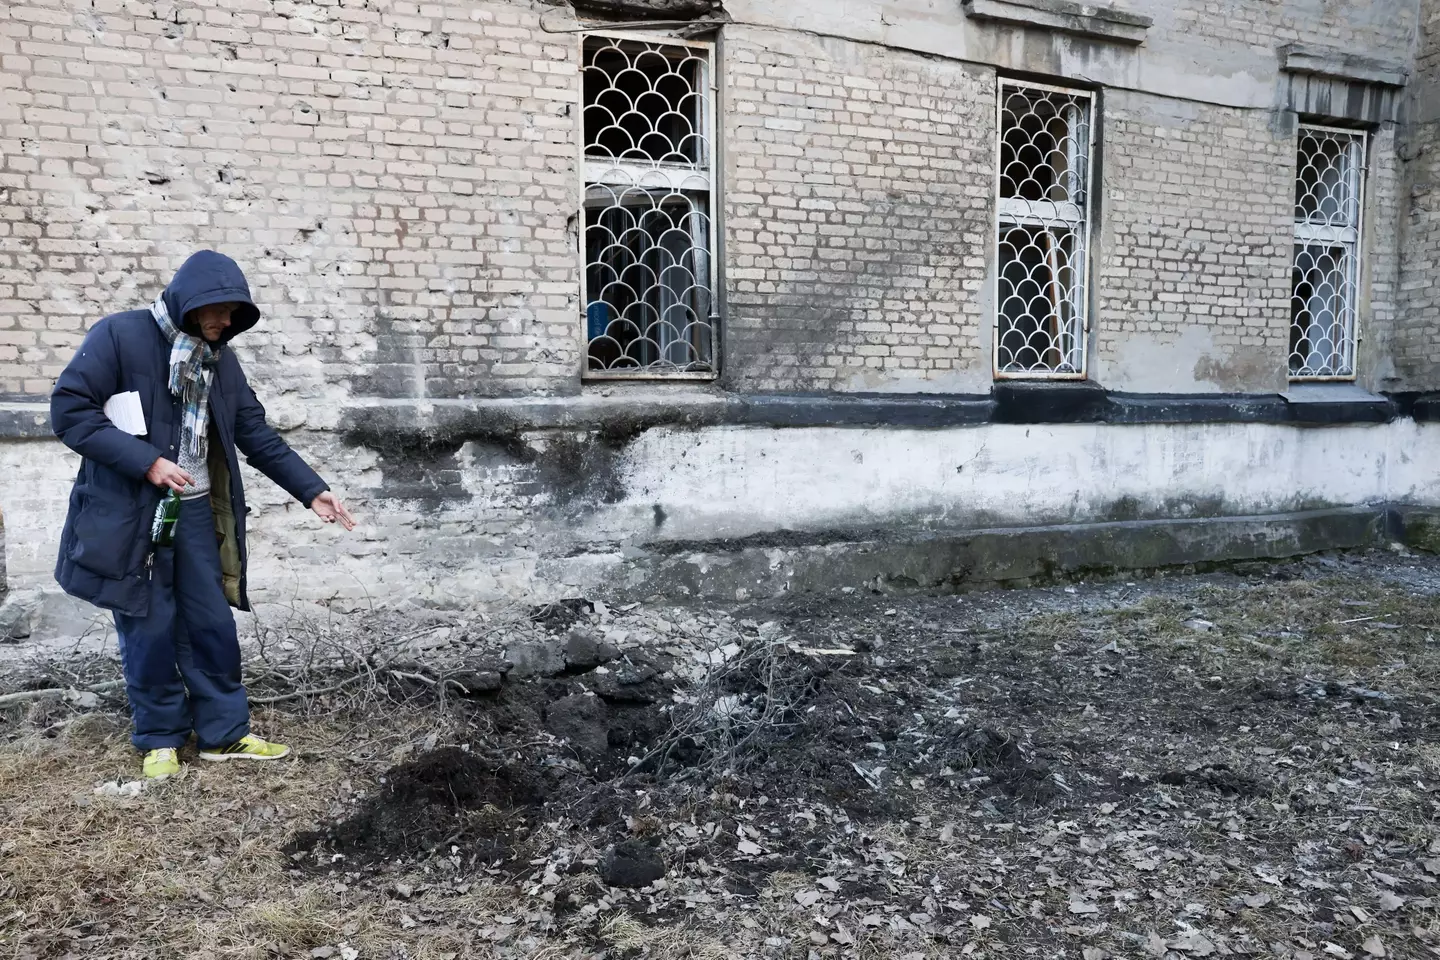 A school in Donetsk damaged in a shelling attack.